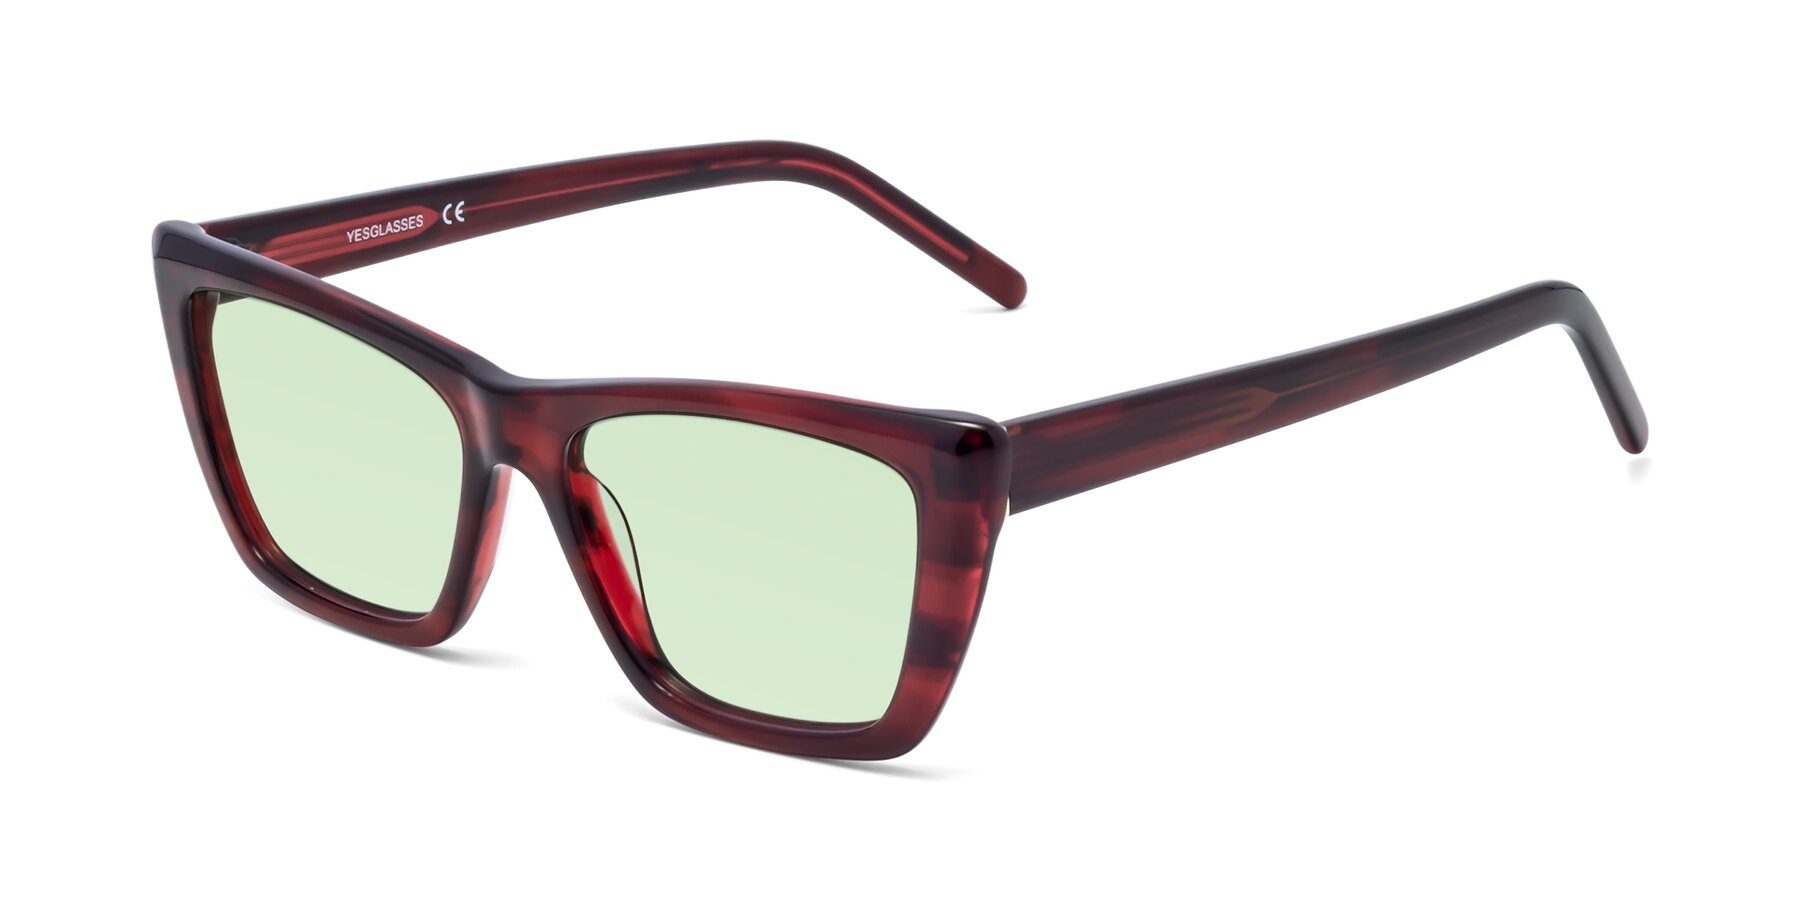 Angle of 1494 in Stripe Wine with Light Green Tinted Lenses